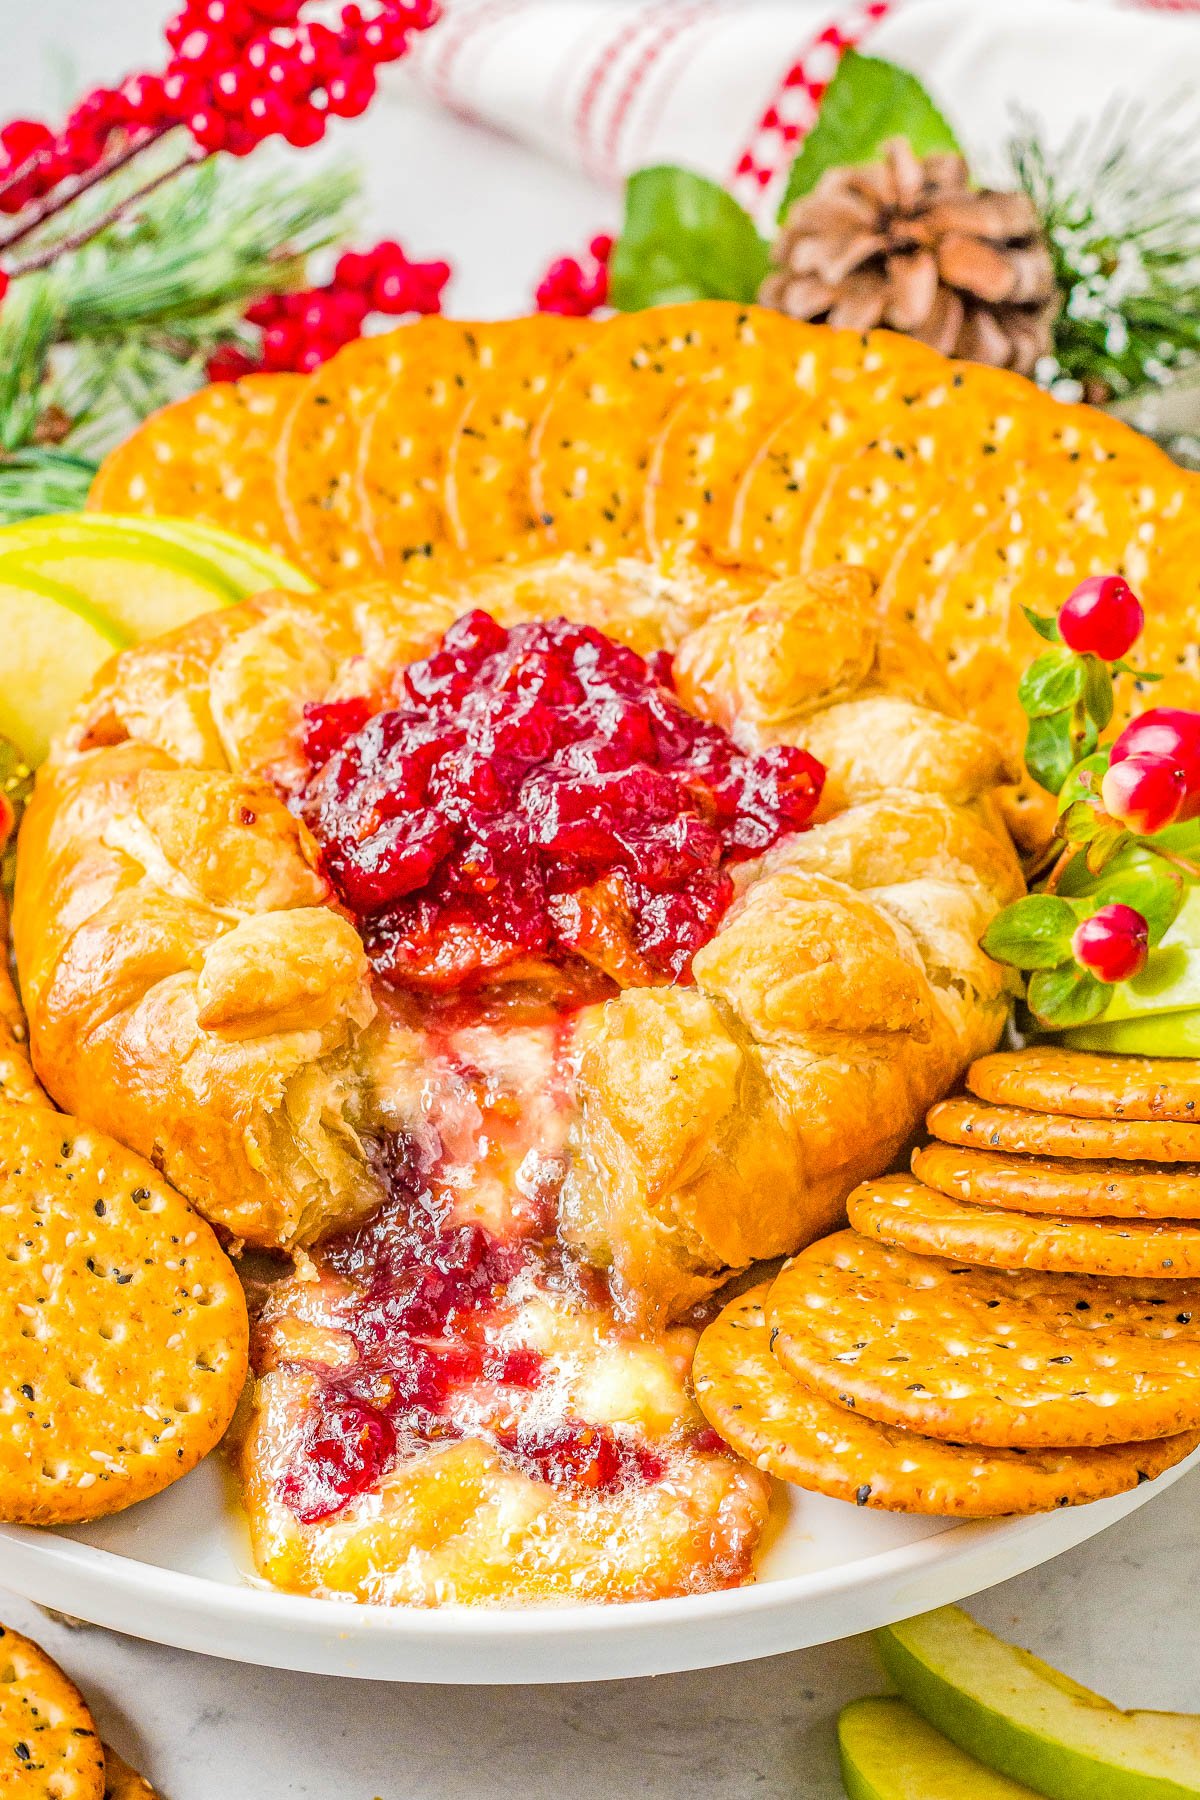 Baked Brie in Puff Pastry - Warm melted cheese, layered with cranberry sauce, and baked in flaky puff pastry is a crowd FAVORITE appetizer! Fast and EASY for you, IRRESISTIBLE for everyone else! It's the PERFECT holiday appetizer for Thanksgiving, Christmas, holiday parties, or New Year's Eve! 